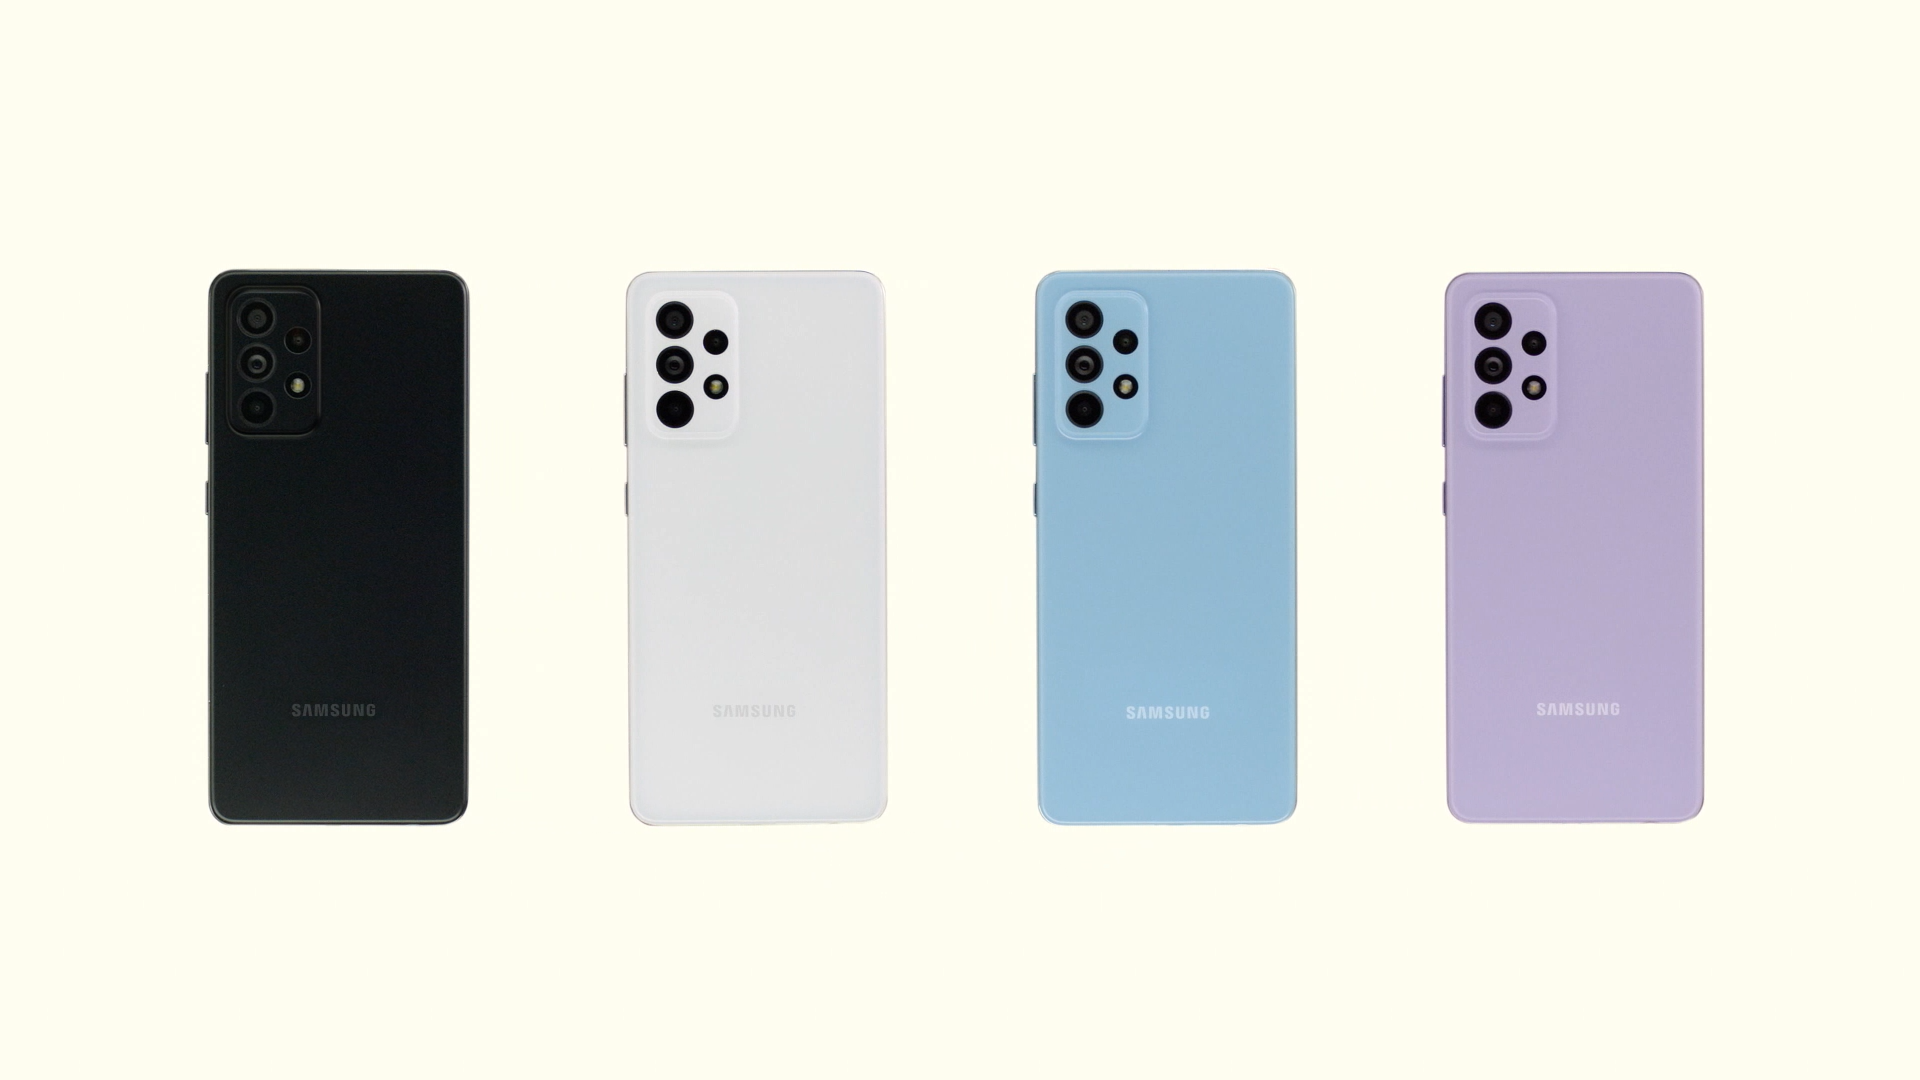 The 2021 Samsung Galaxy A series colors - Samsung announces the Galaxy A52 5G and Galaxy A72, &quot;Awesome is for everyone!&quot;